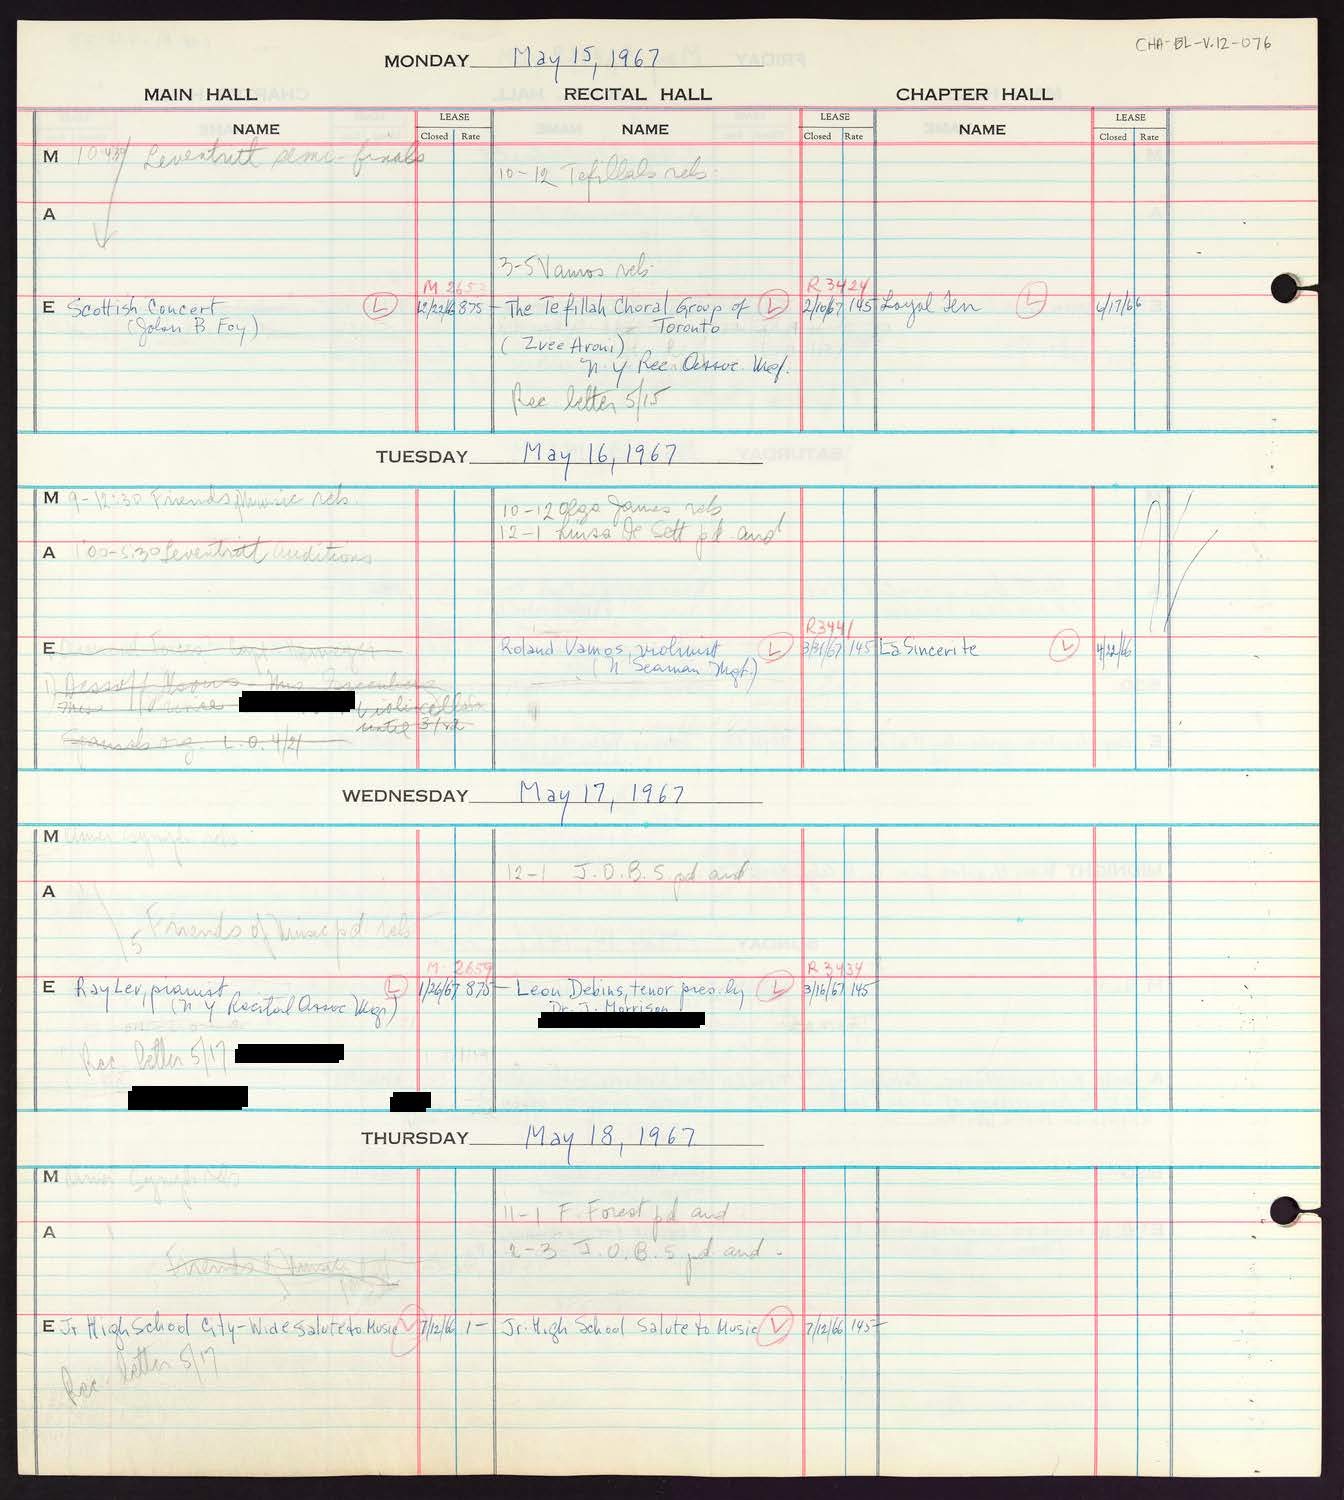 Carnegie Hall Booking Ledger, volume 12, page 76